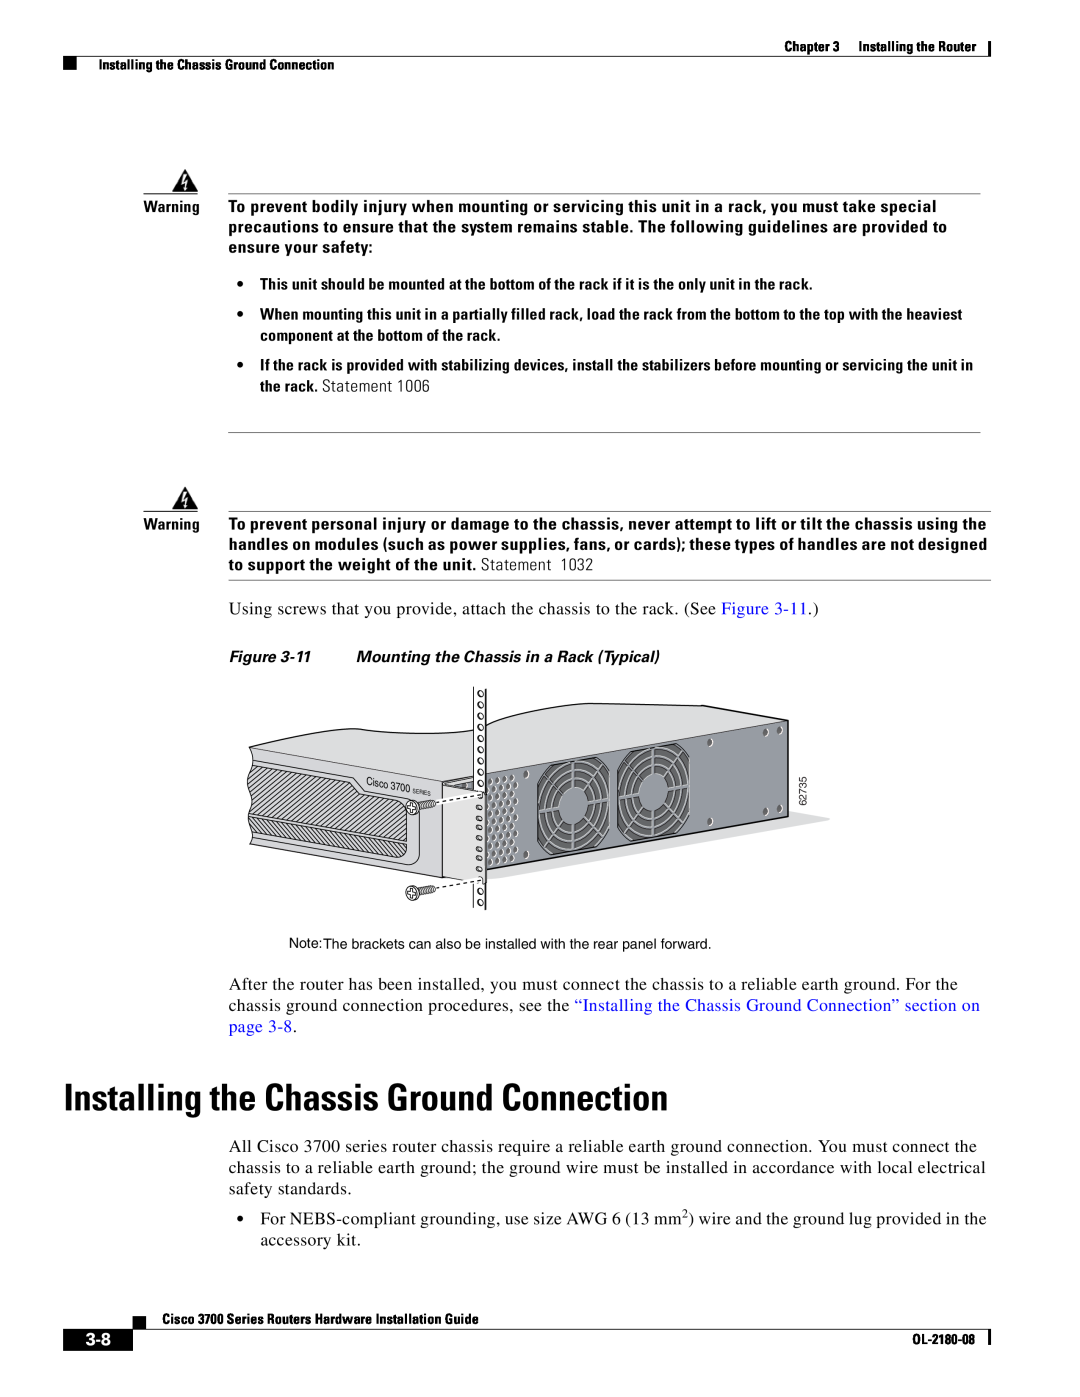 Cisco Systems 3700 Series manual Installing the Chassis Ground Connection, 11 Mounting the Chassis in a Rack Typical 